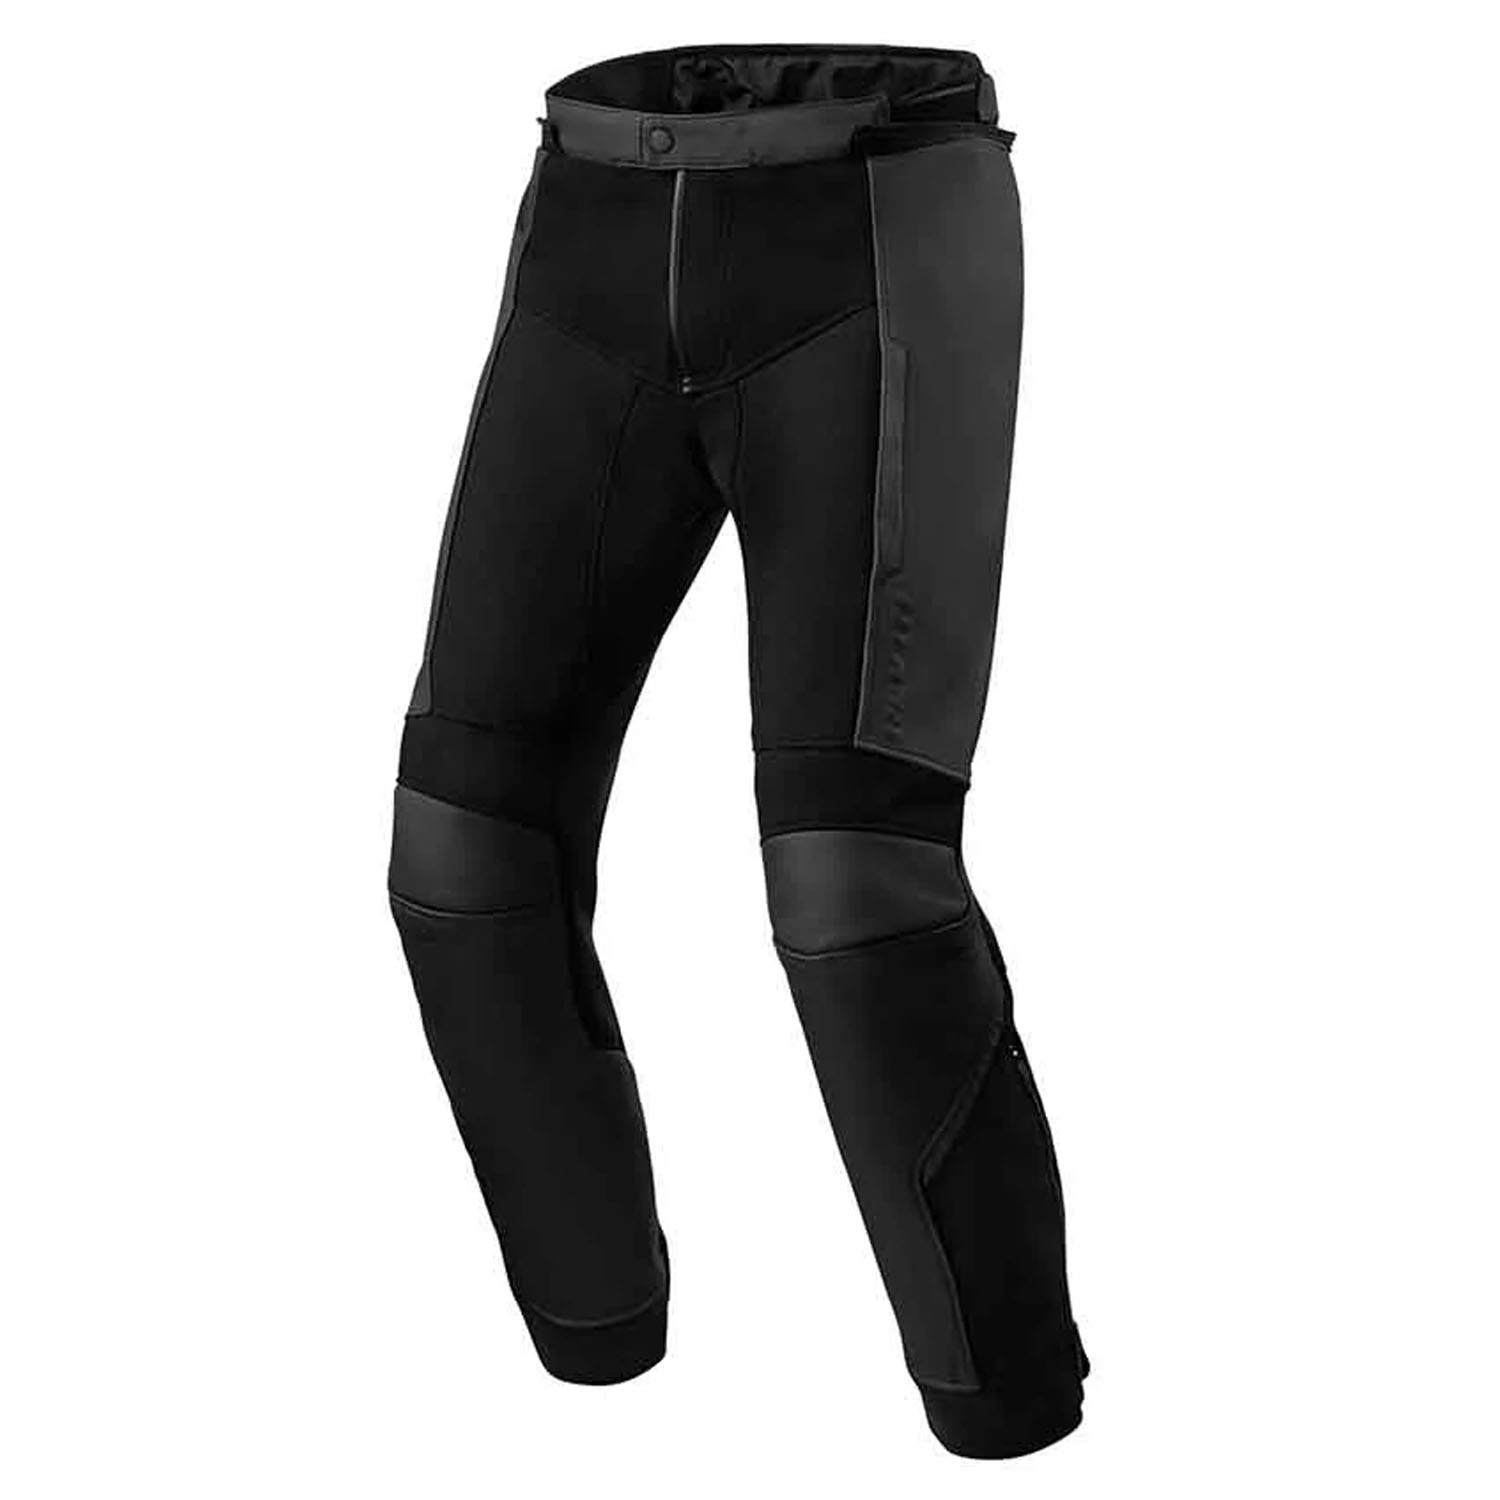 Image of REV'IT! Ignition 4 H2O Black Long Motorcycle Pants Size 48 ID 8700001359405